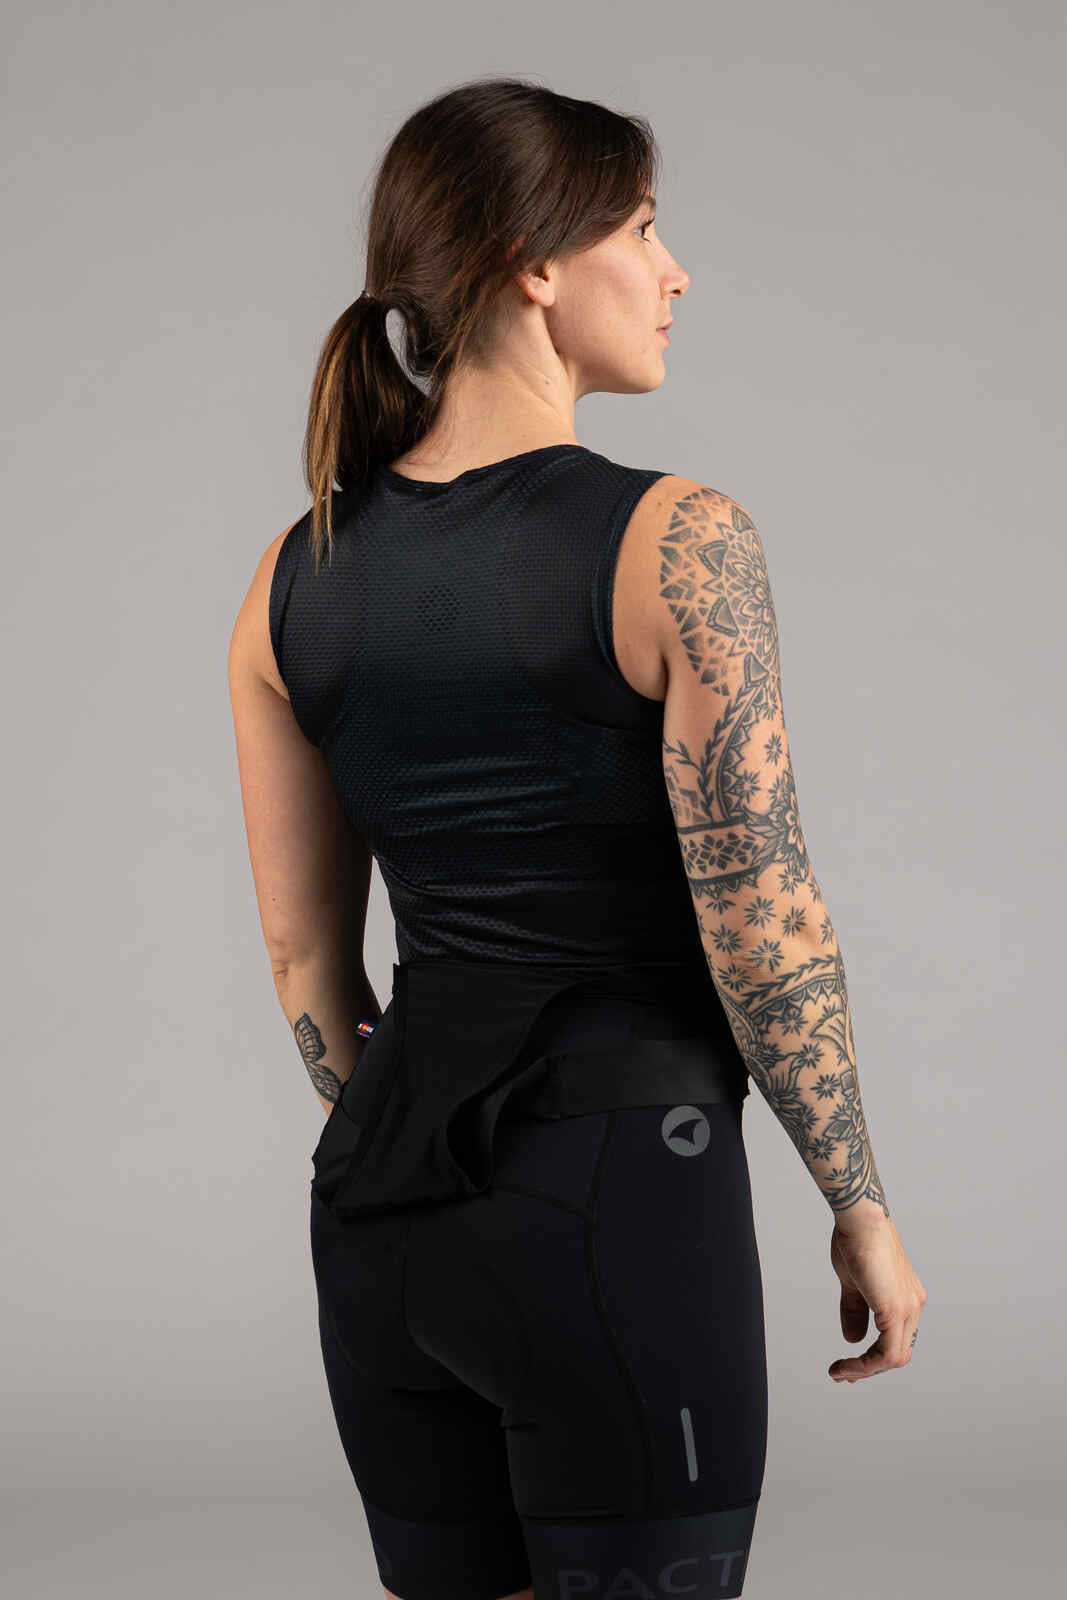 Women's Navy Blue Sleeveless Cycling Base Layer - Back View